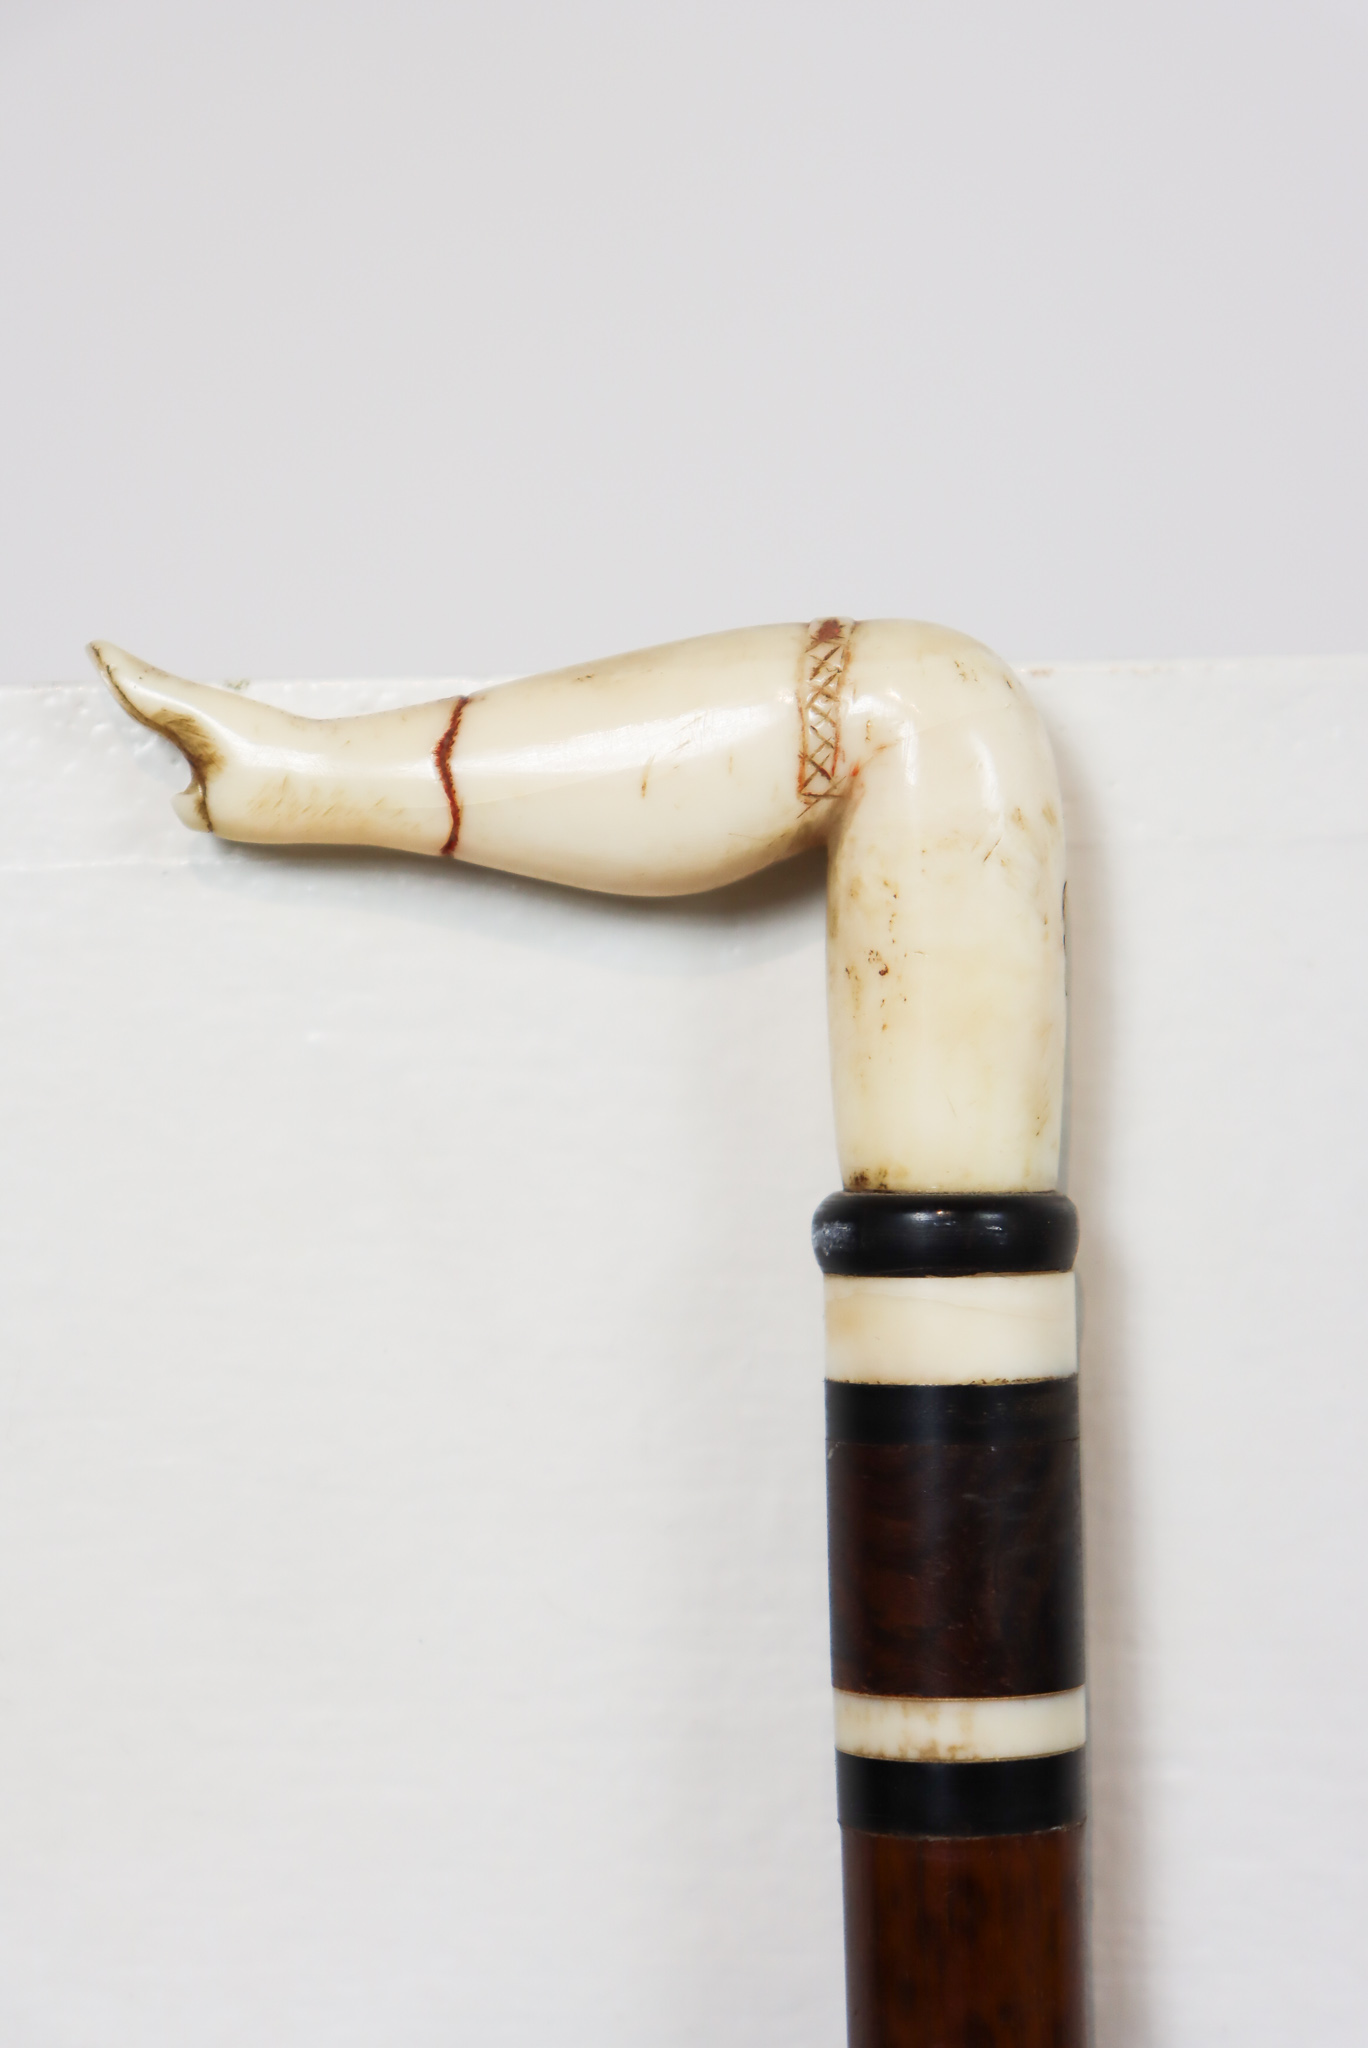 19th C. Whale Bone Boot Handle Cane - Image 6 of 7